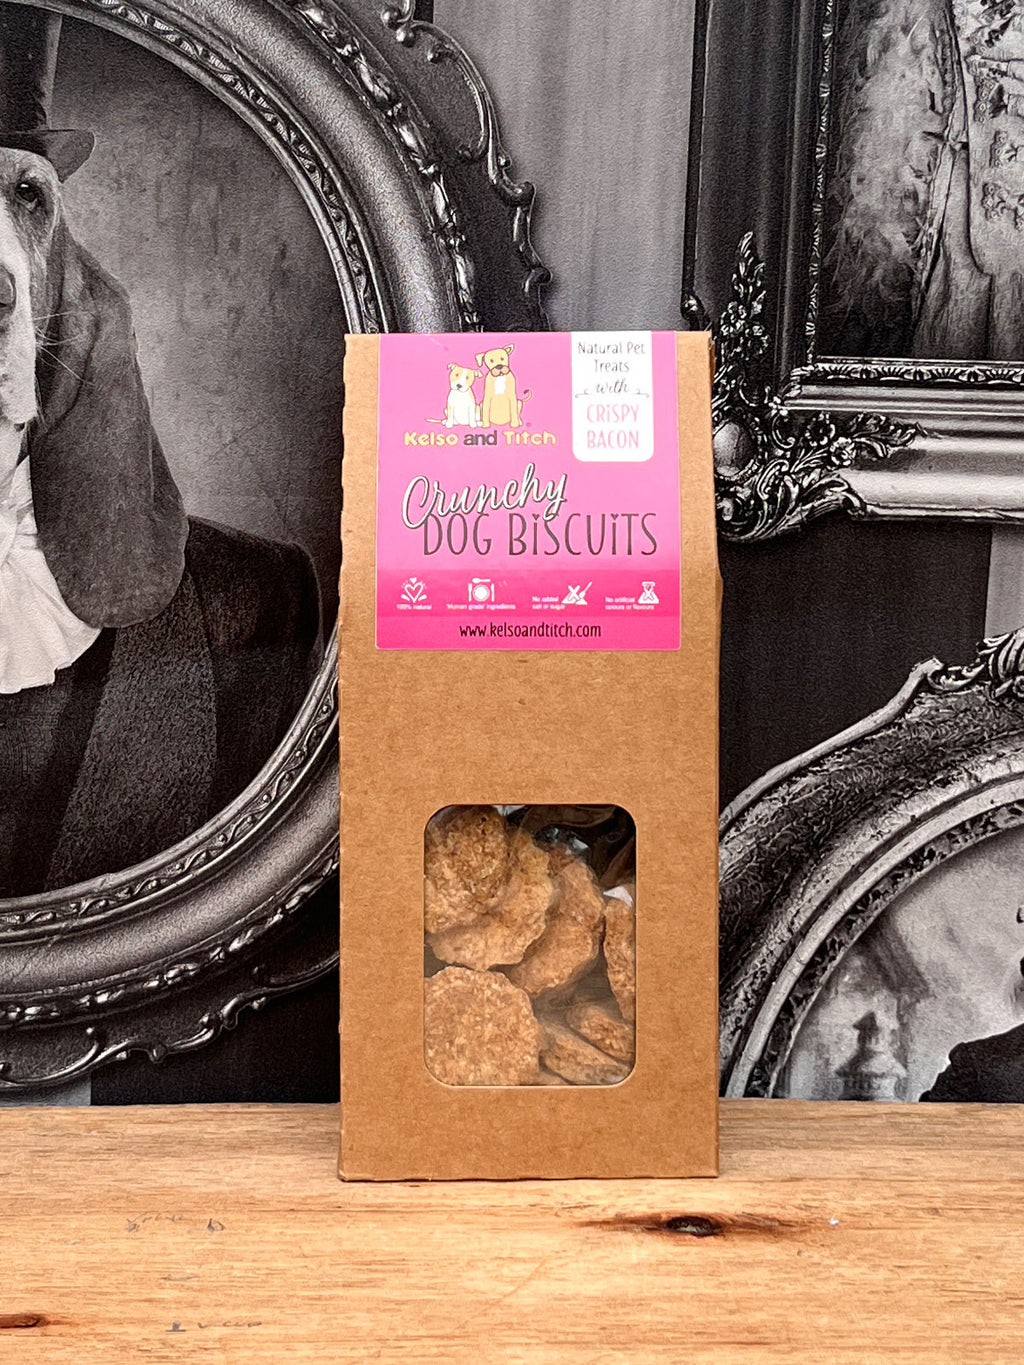 Kelso and Titch Crunchy Dog Biscuits - Crispy Bacon